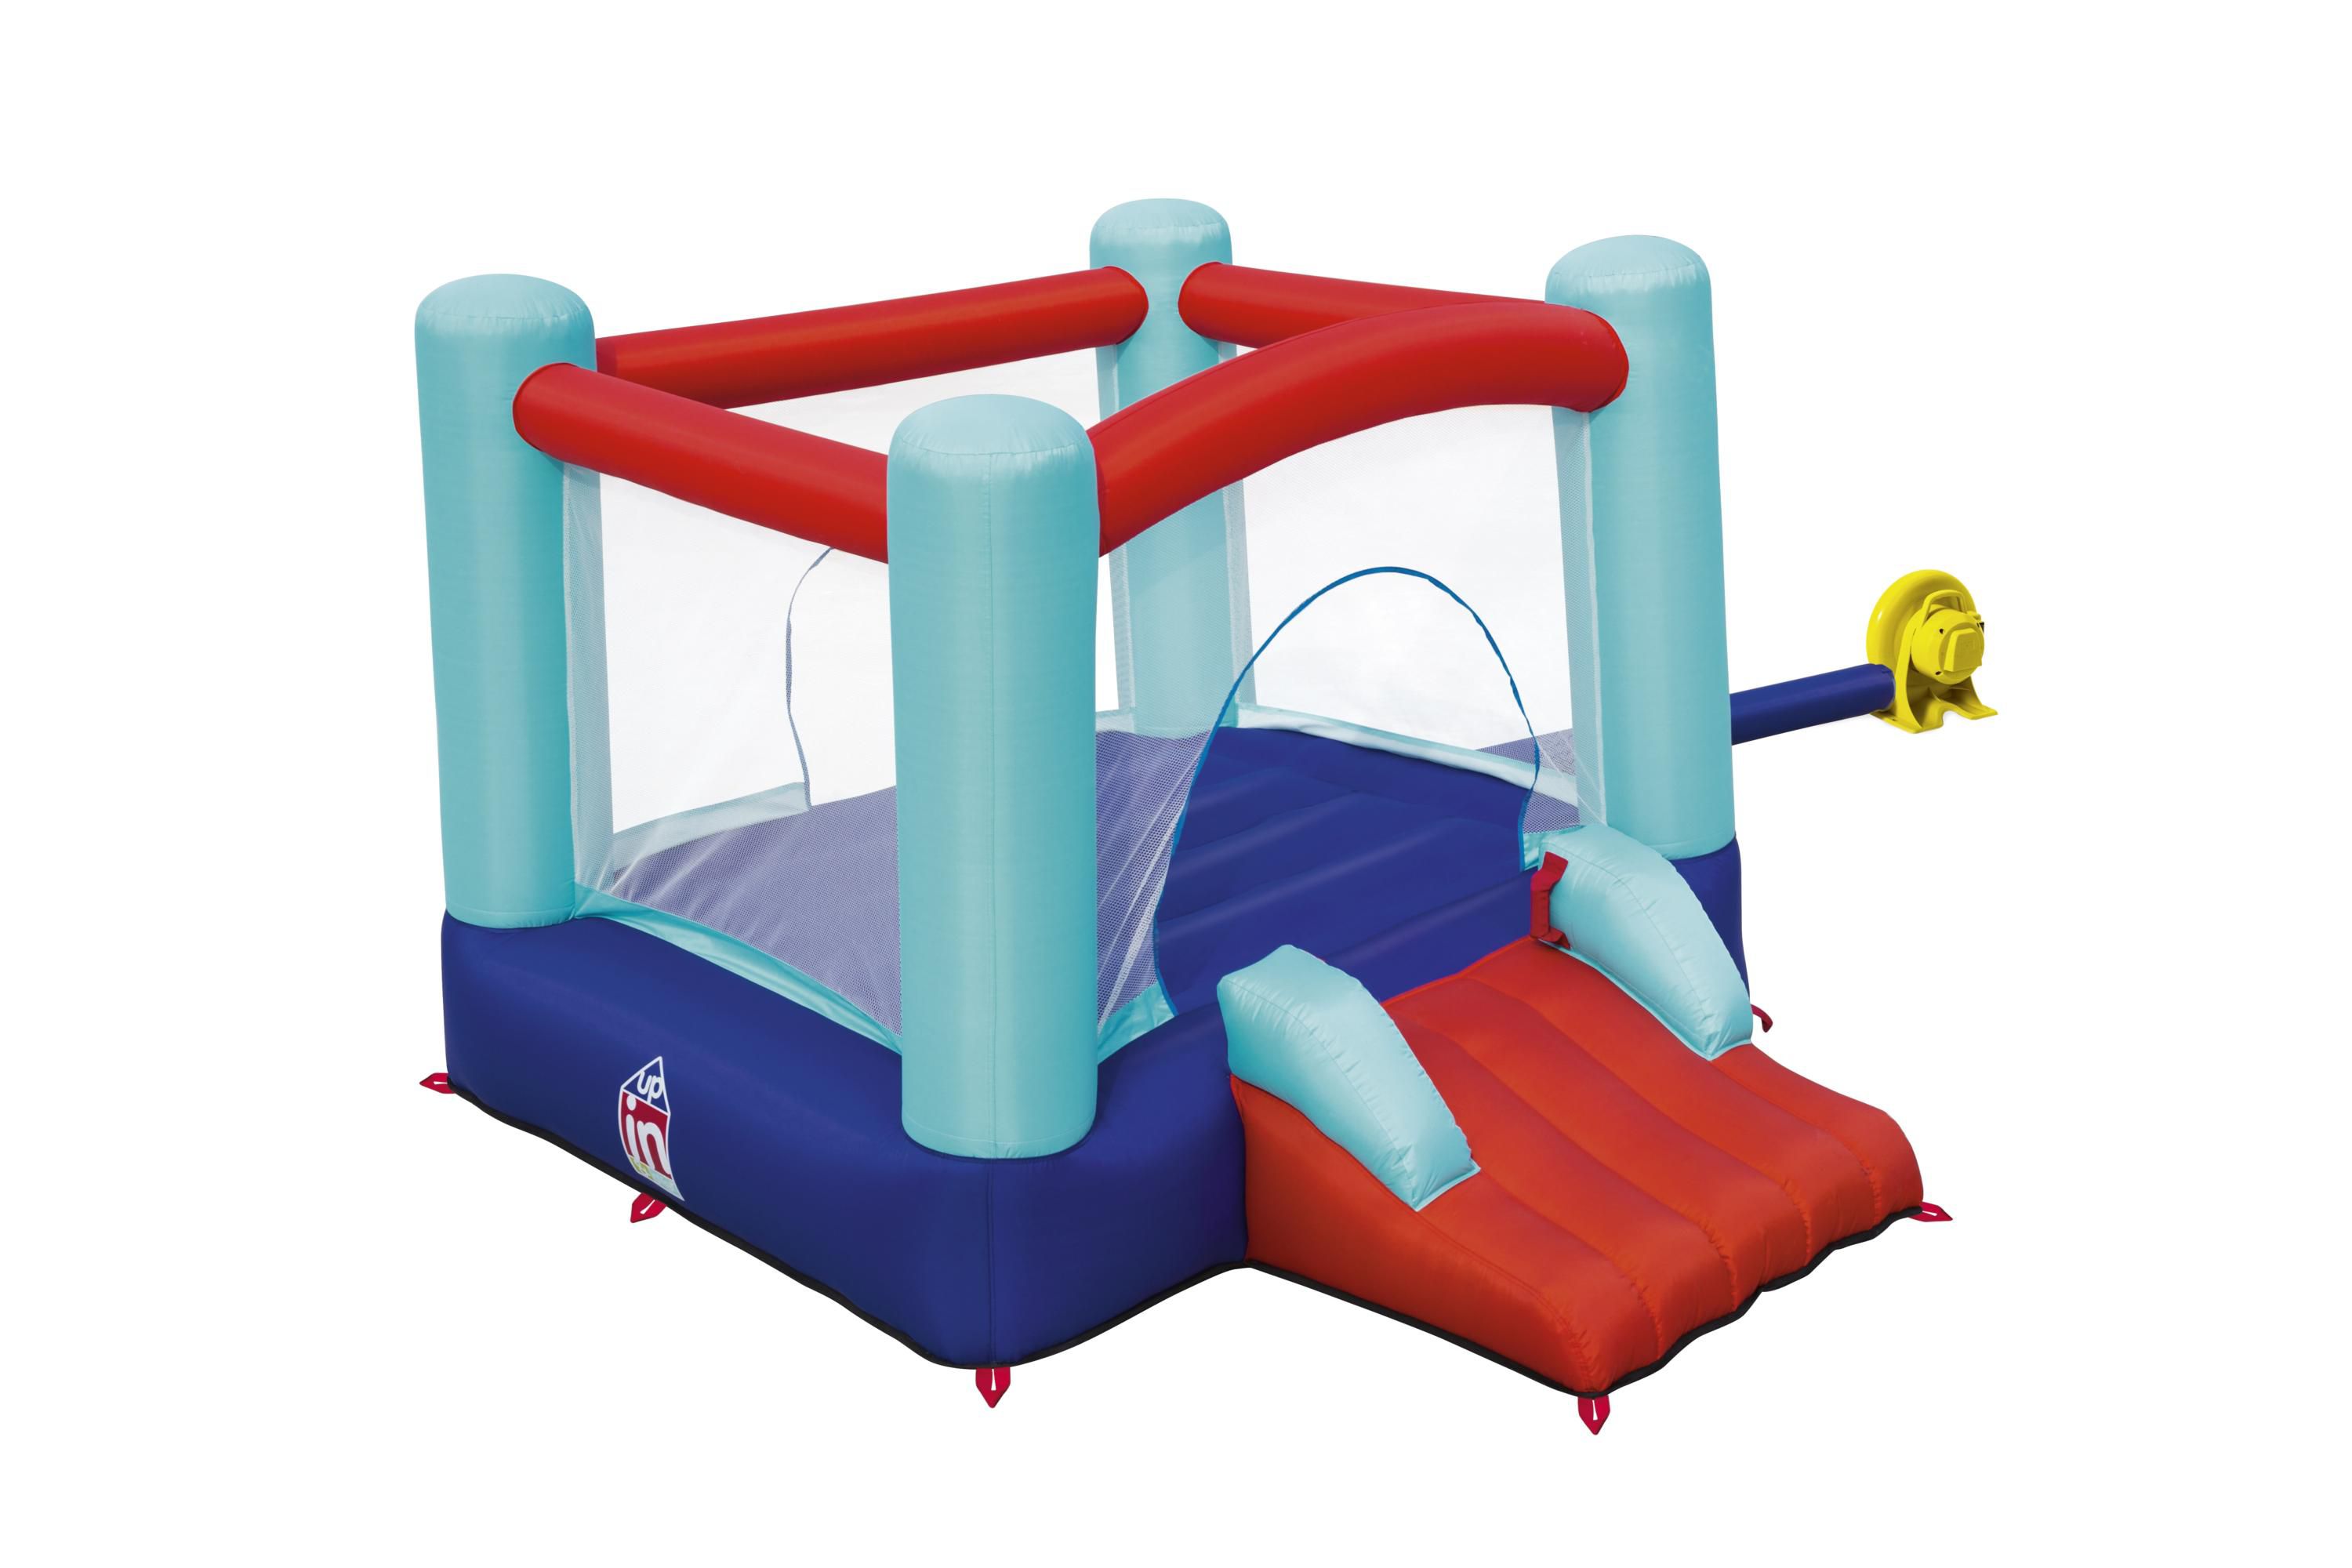 Bestway Blue & red Inflatable bouncy castle with small slide entrance/exit Rectangular Bounce & slide